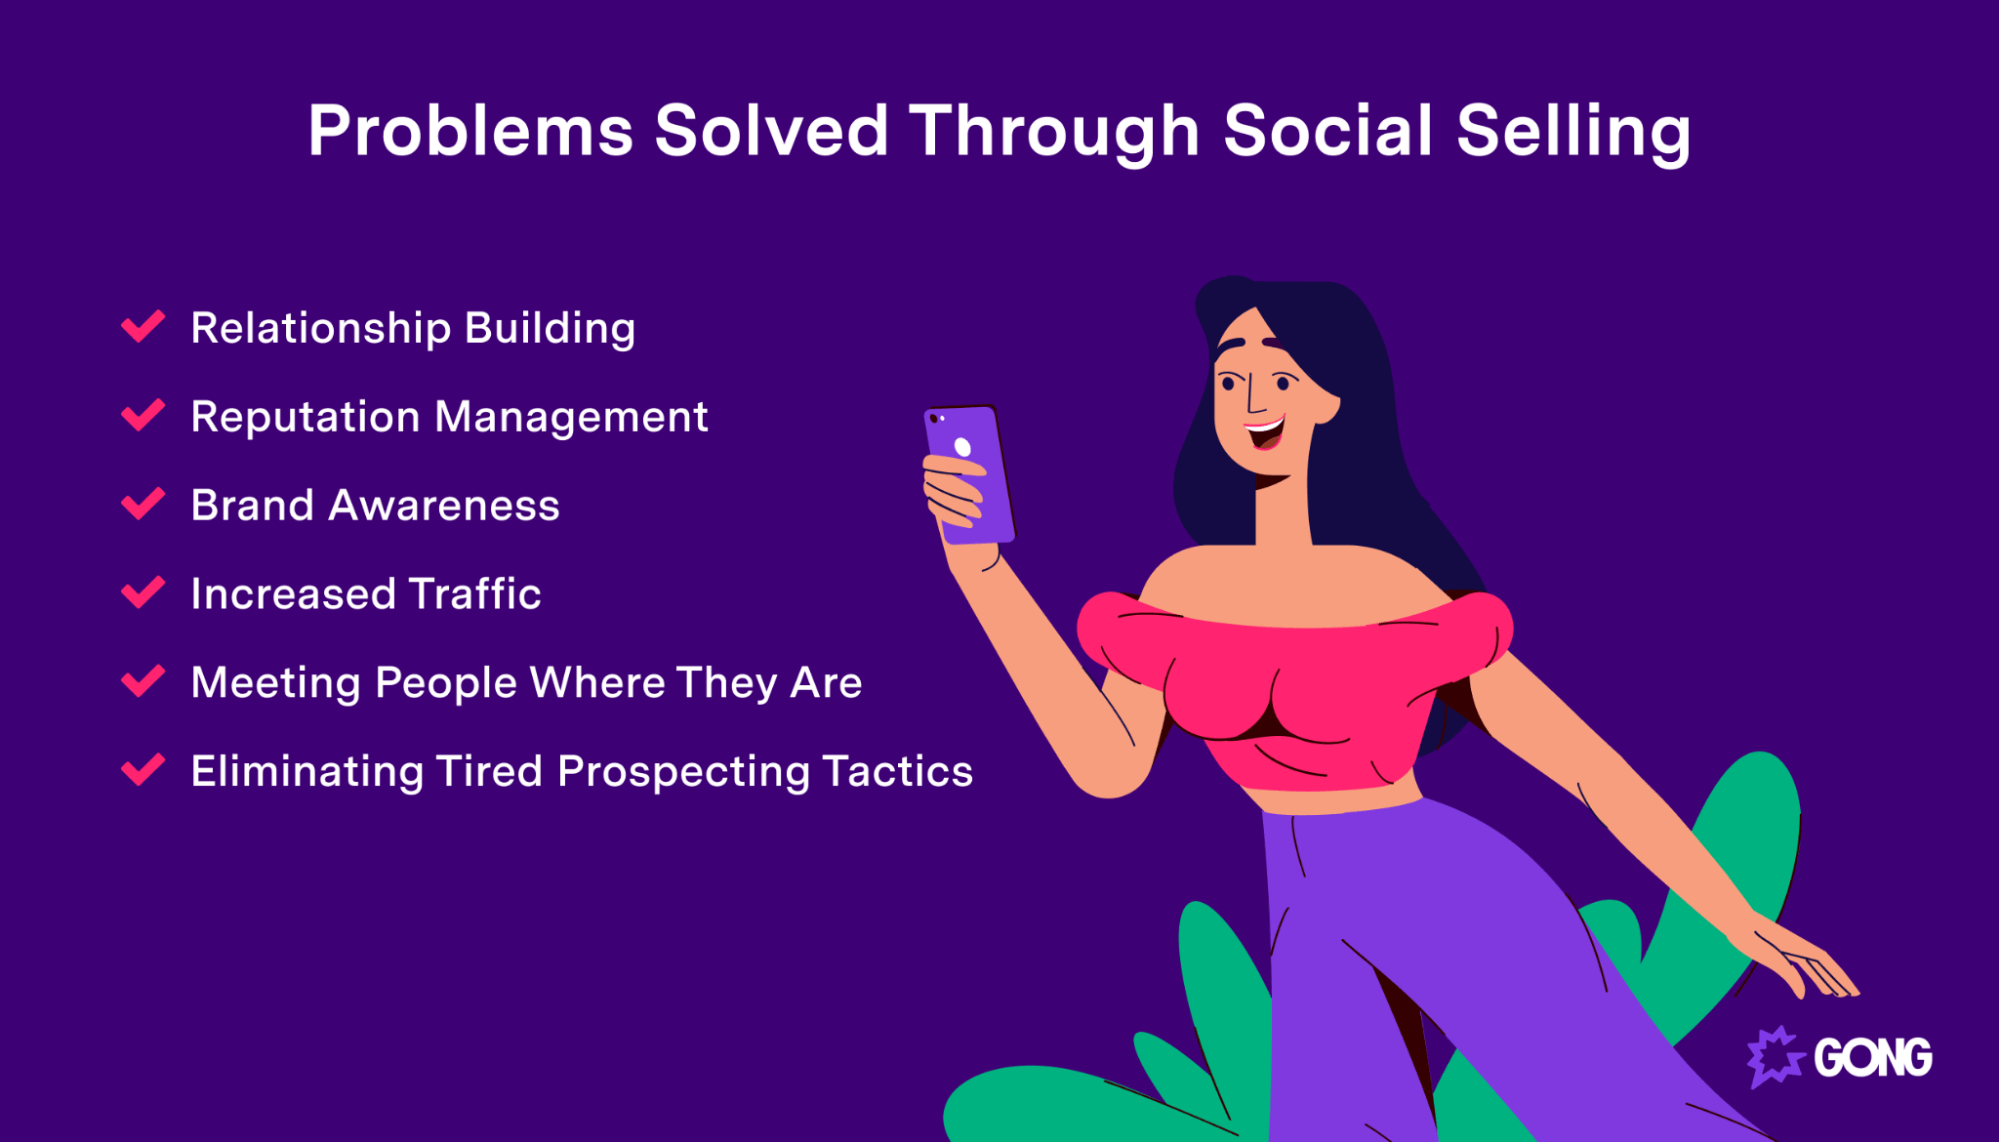 An image of a checklist showing the problems social selling solves